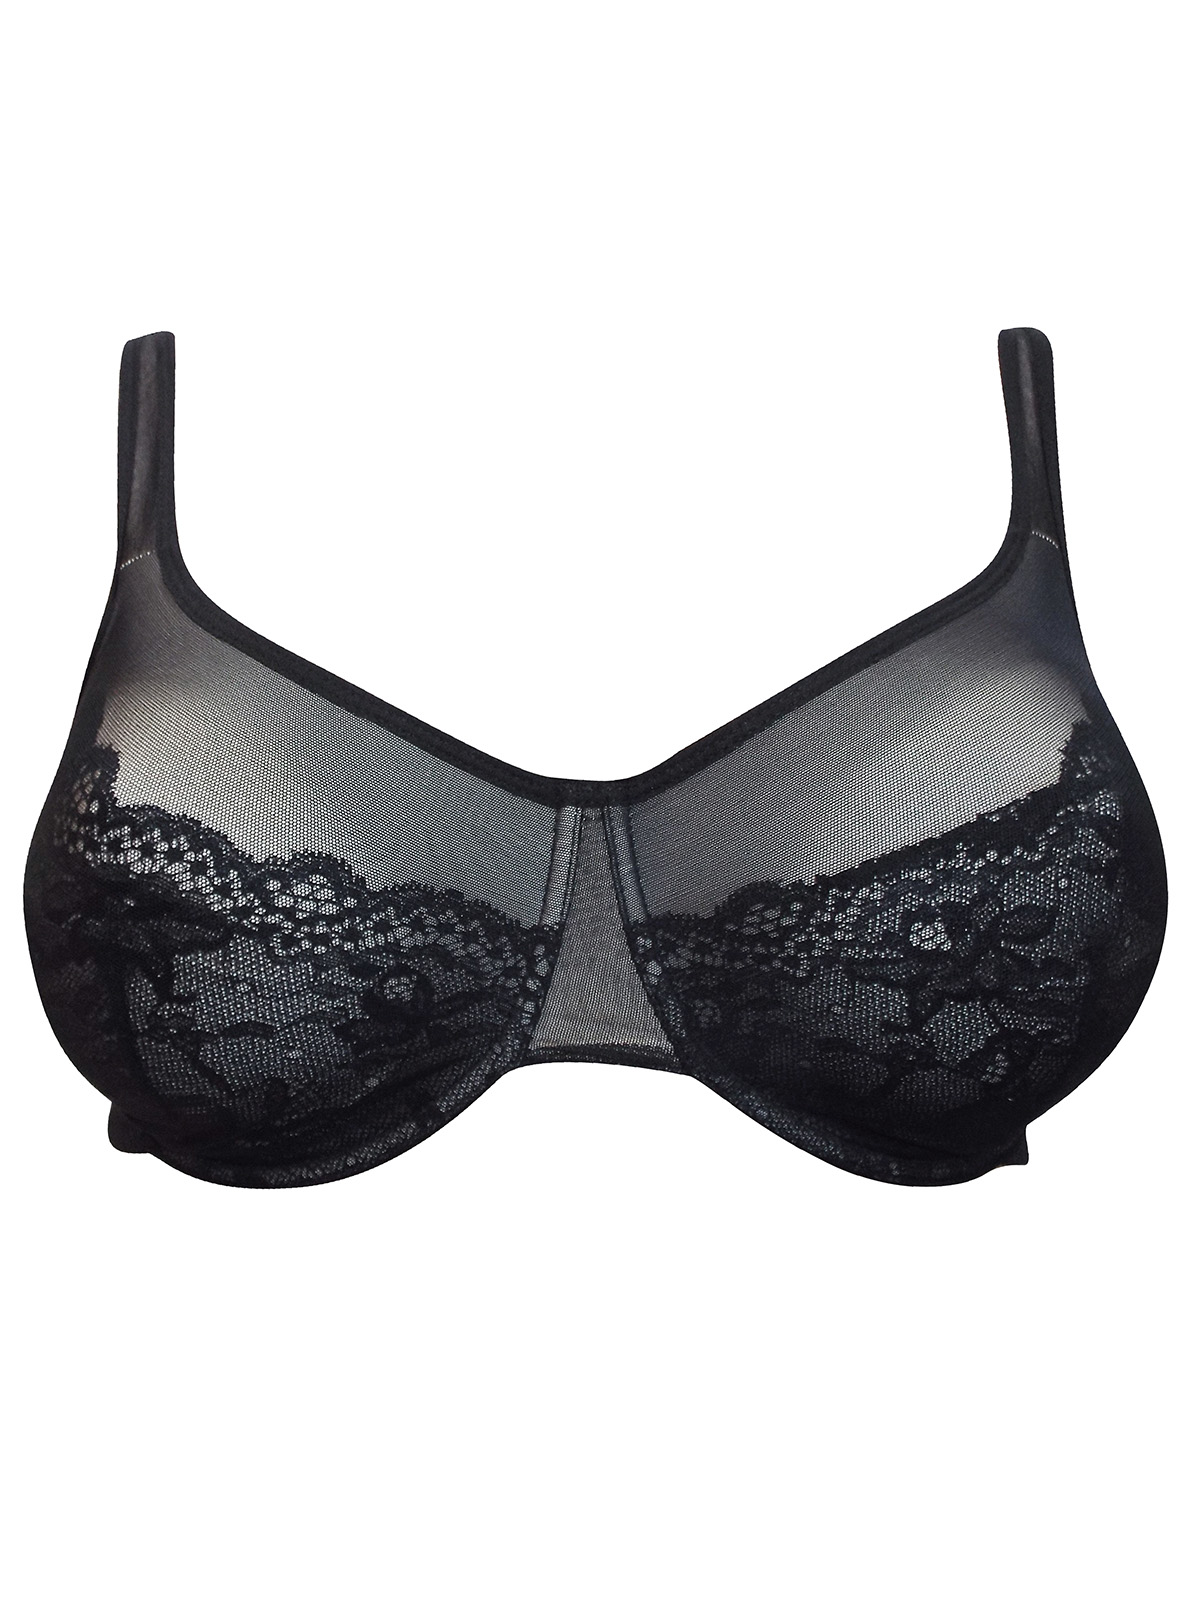 Poppy Jaspe Bralette - Our bras are naturally breathable